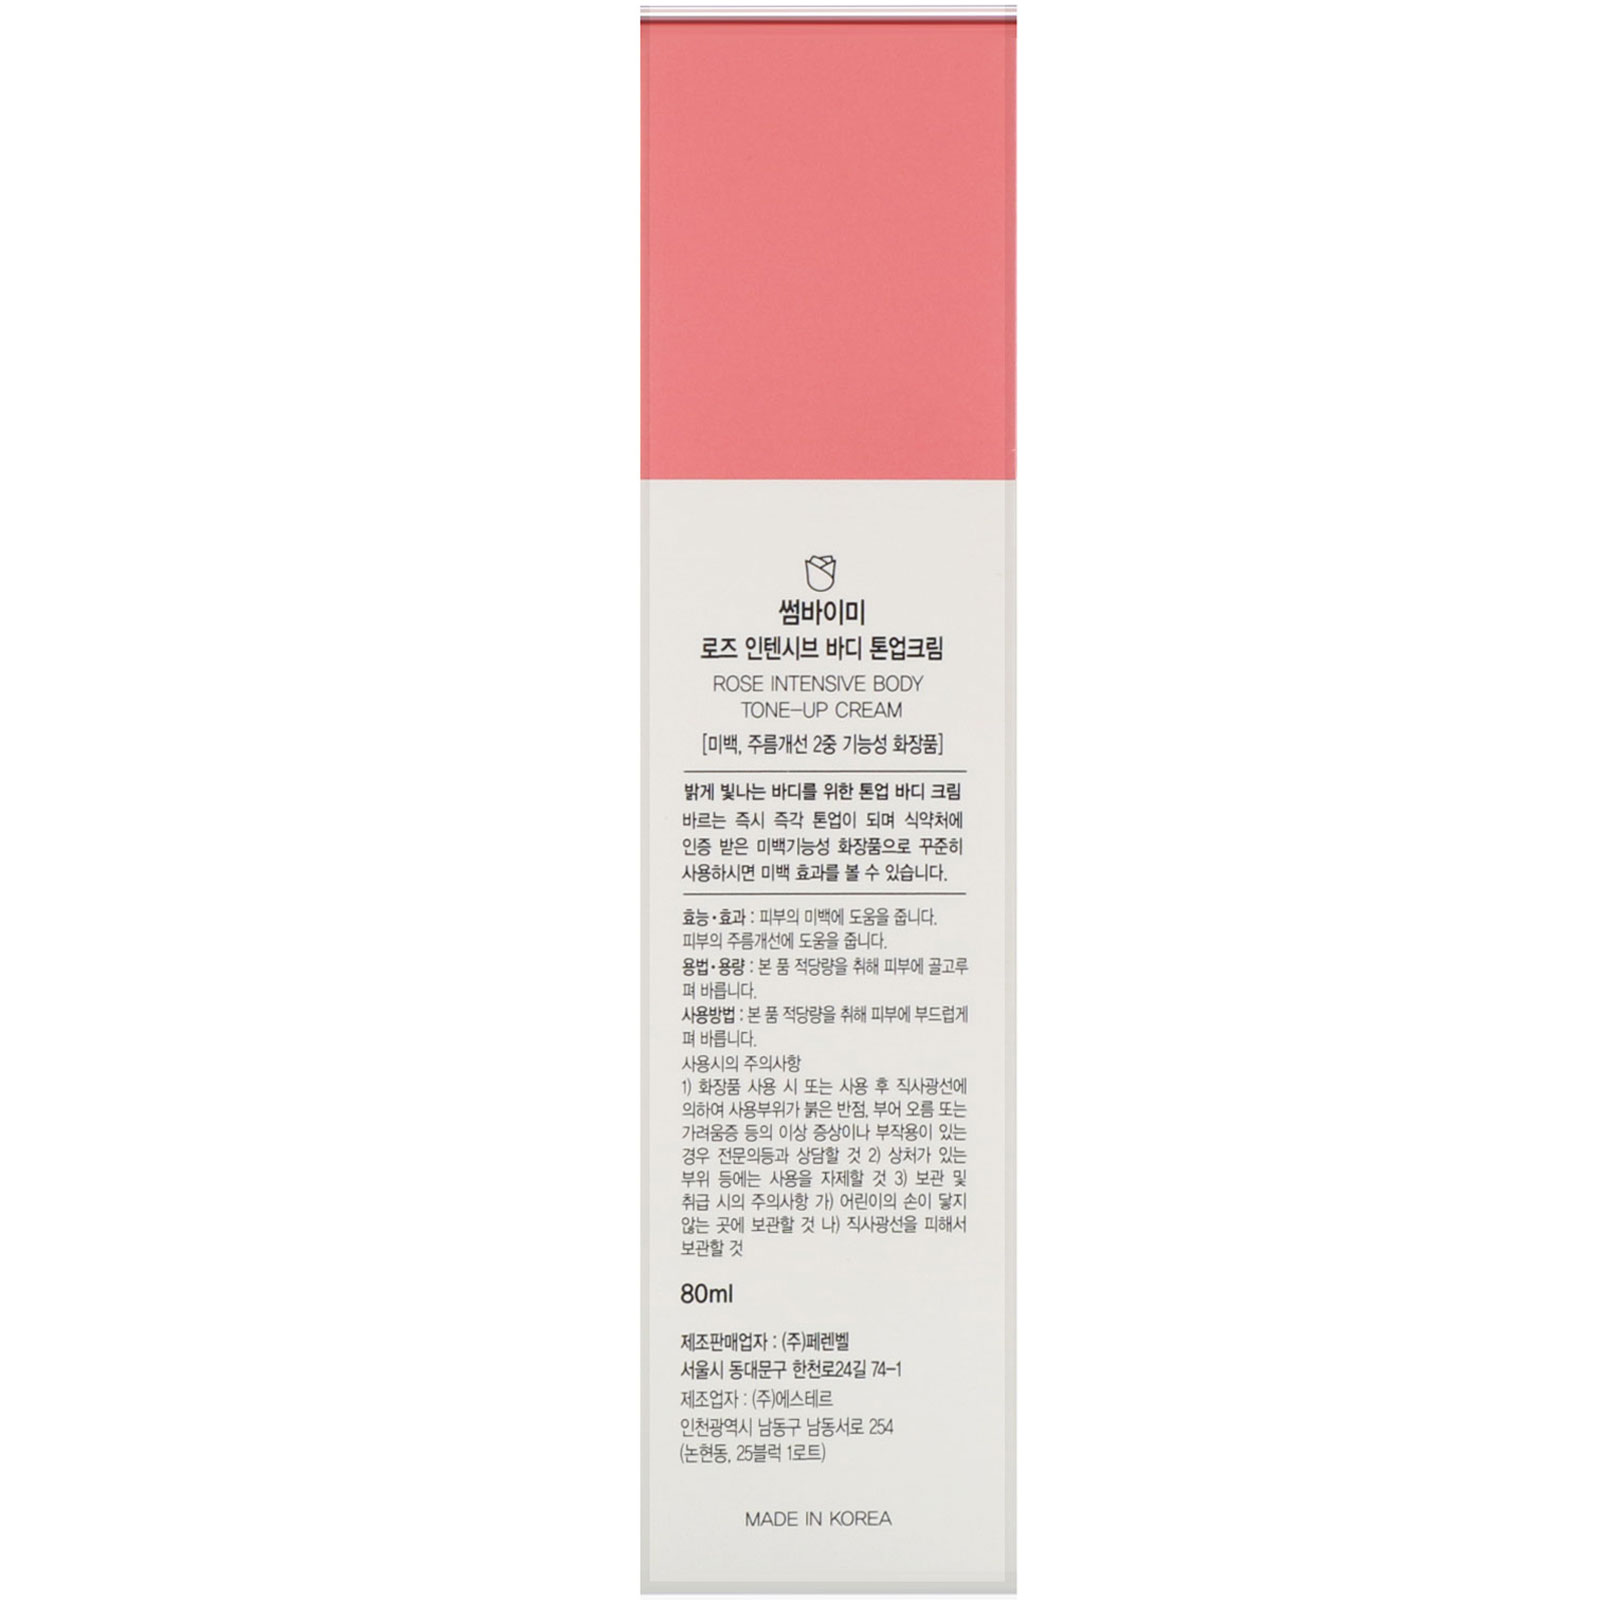 Rose Tone up Cream. Some by mi Rose Intensive Tone-up Cream (50ml). Rose intense база. Vella Intensive Tone up отзывы.